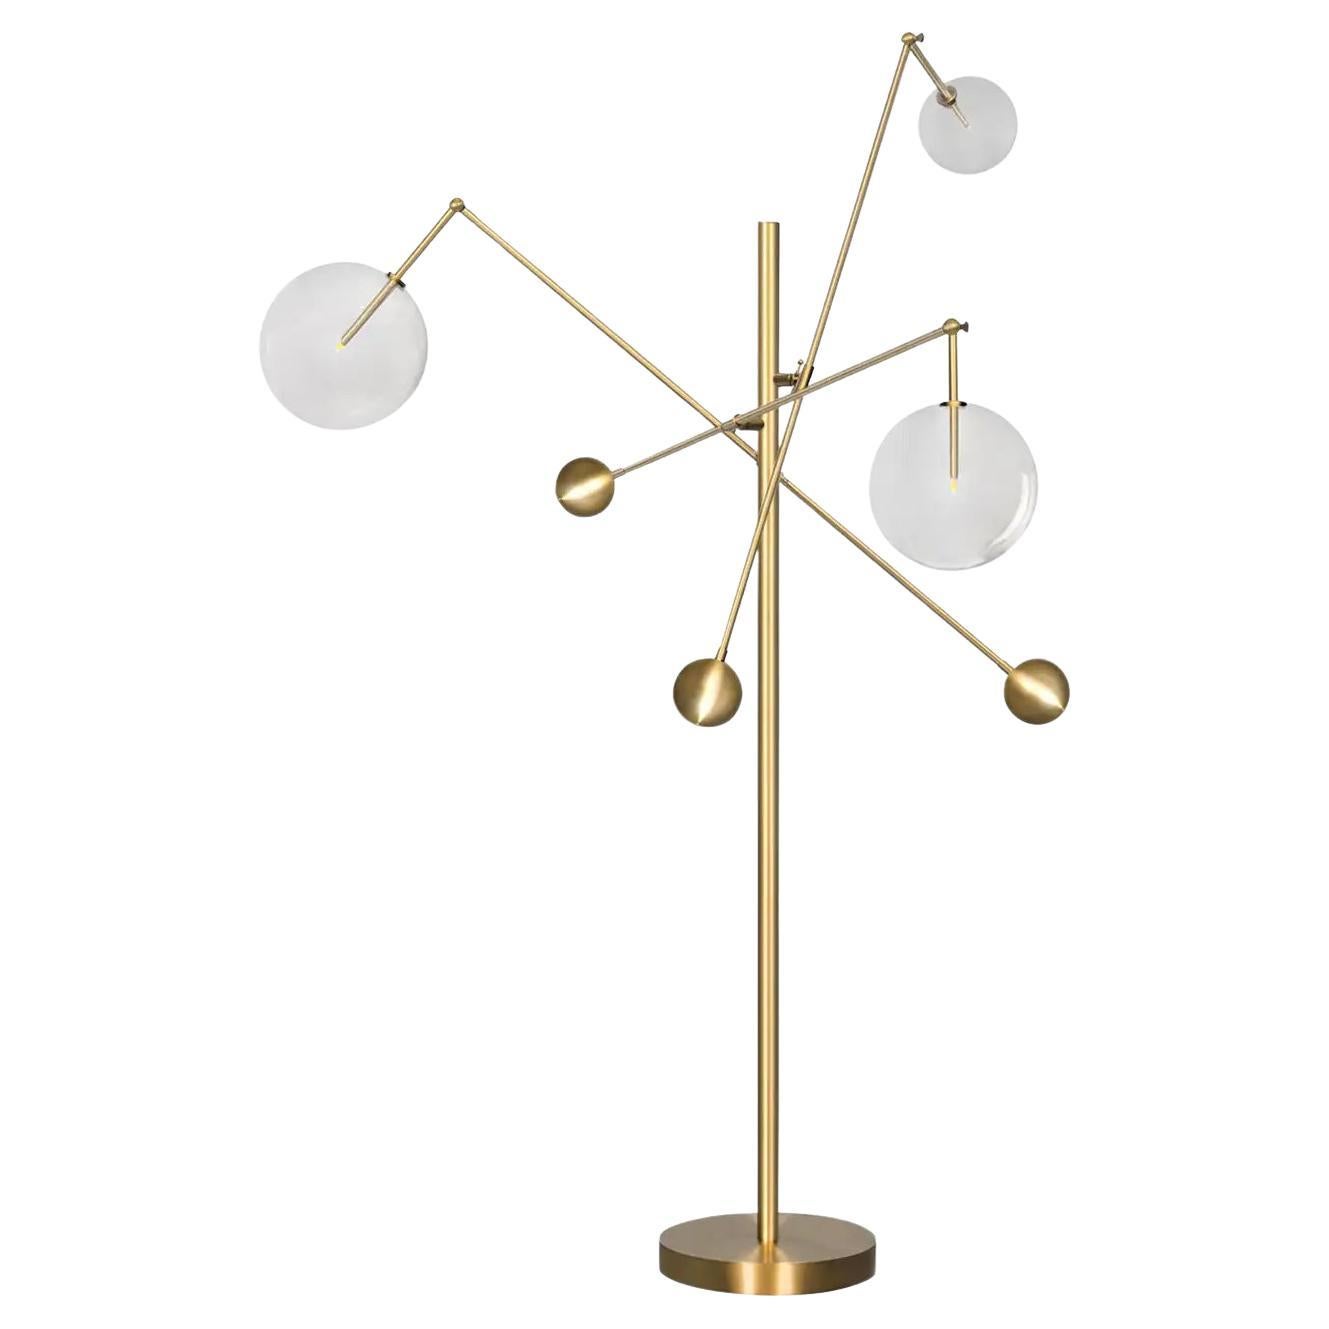 Milan 3 Arms Brass Floor Lamp by Schwung For Sale